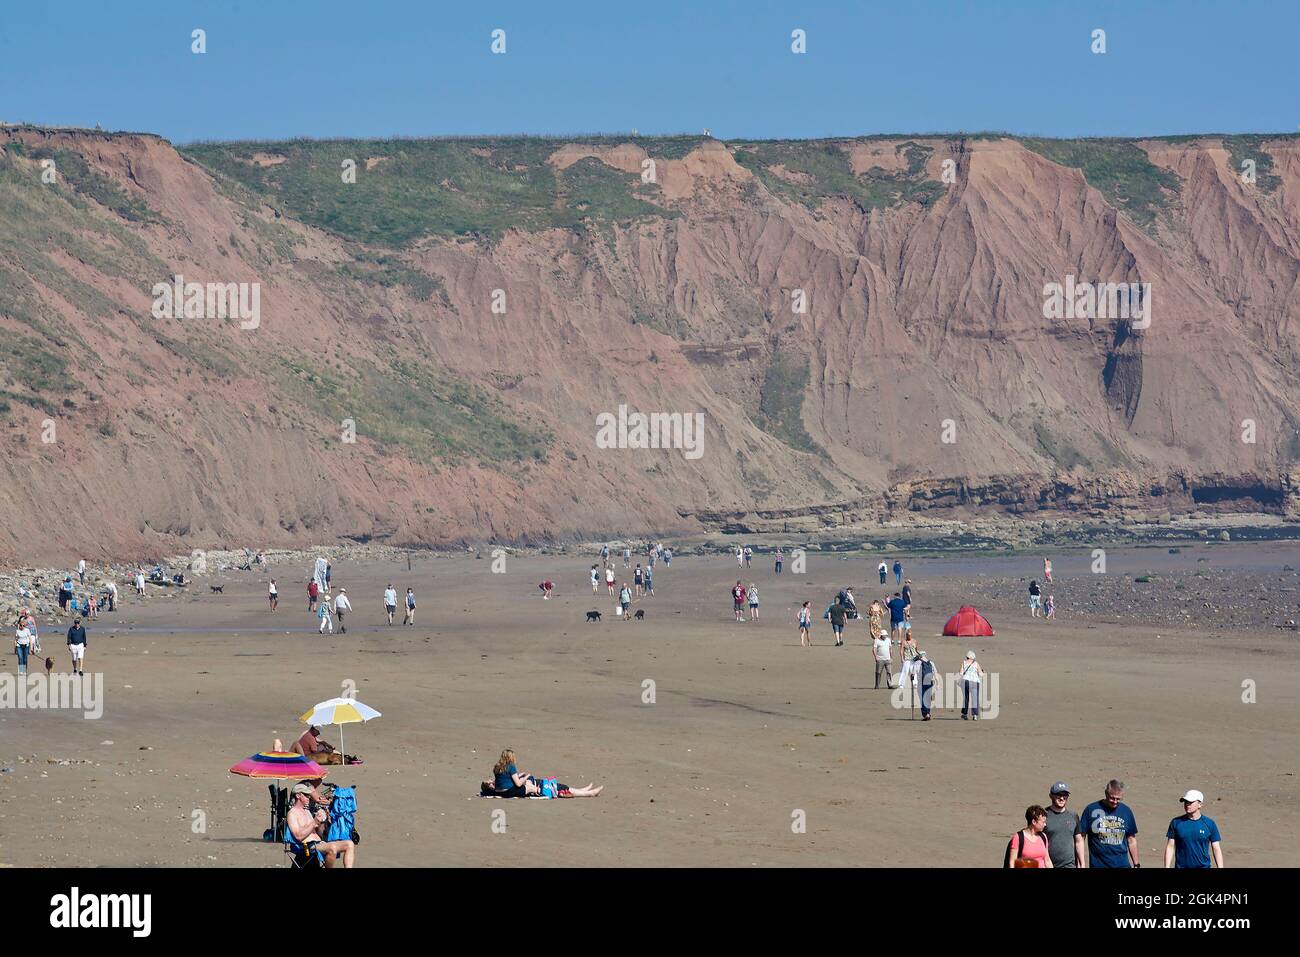 People sunbathing on Filey Beach, North Yorkshire east coast, busy with holiday makers, Northern England, UK Stock Photo